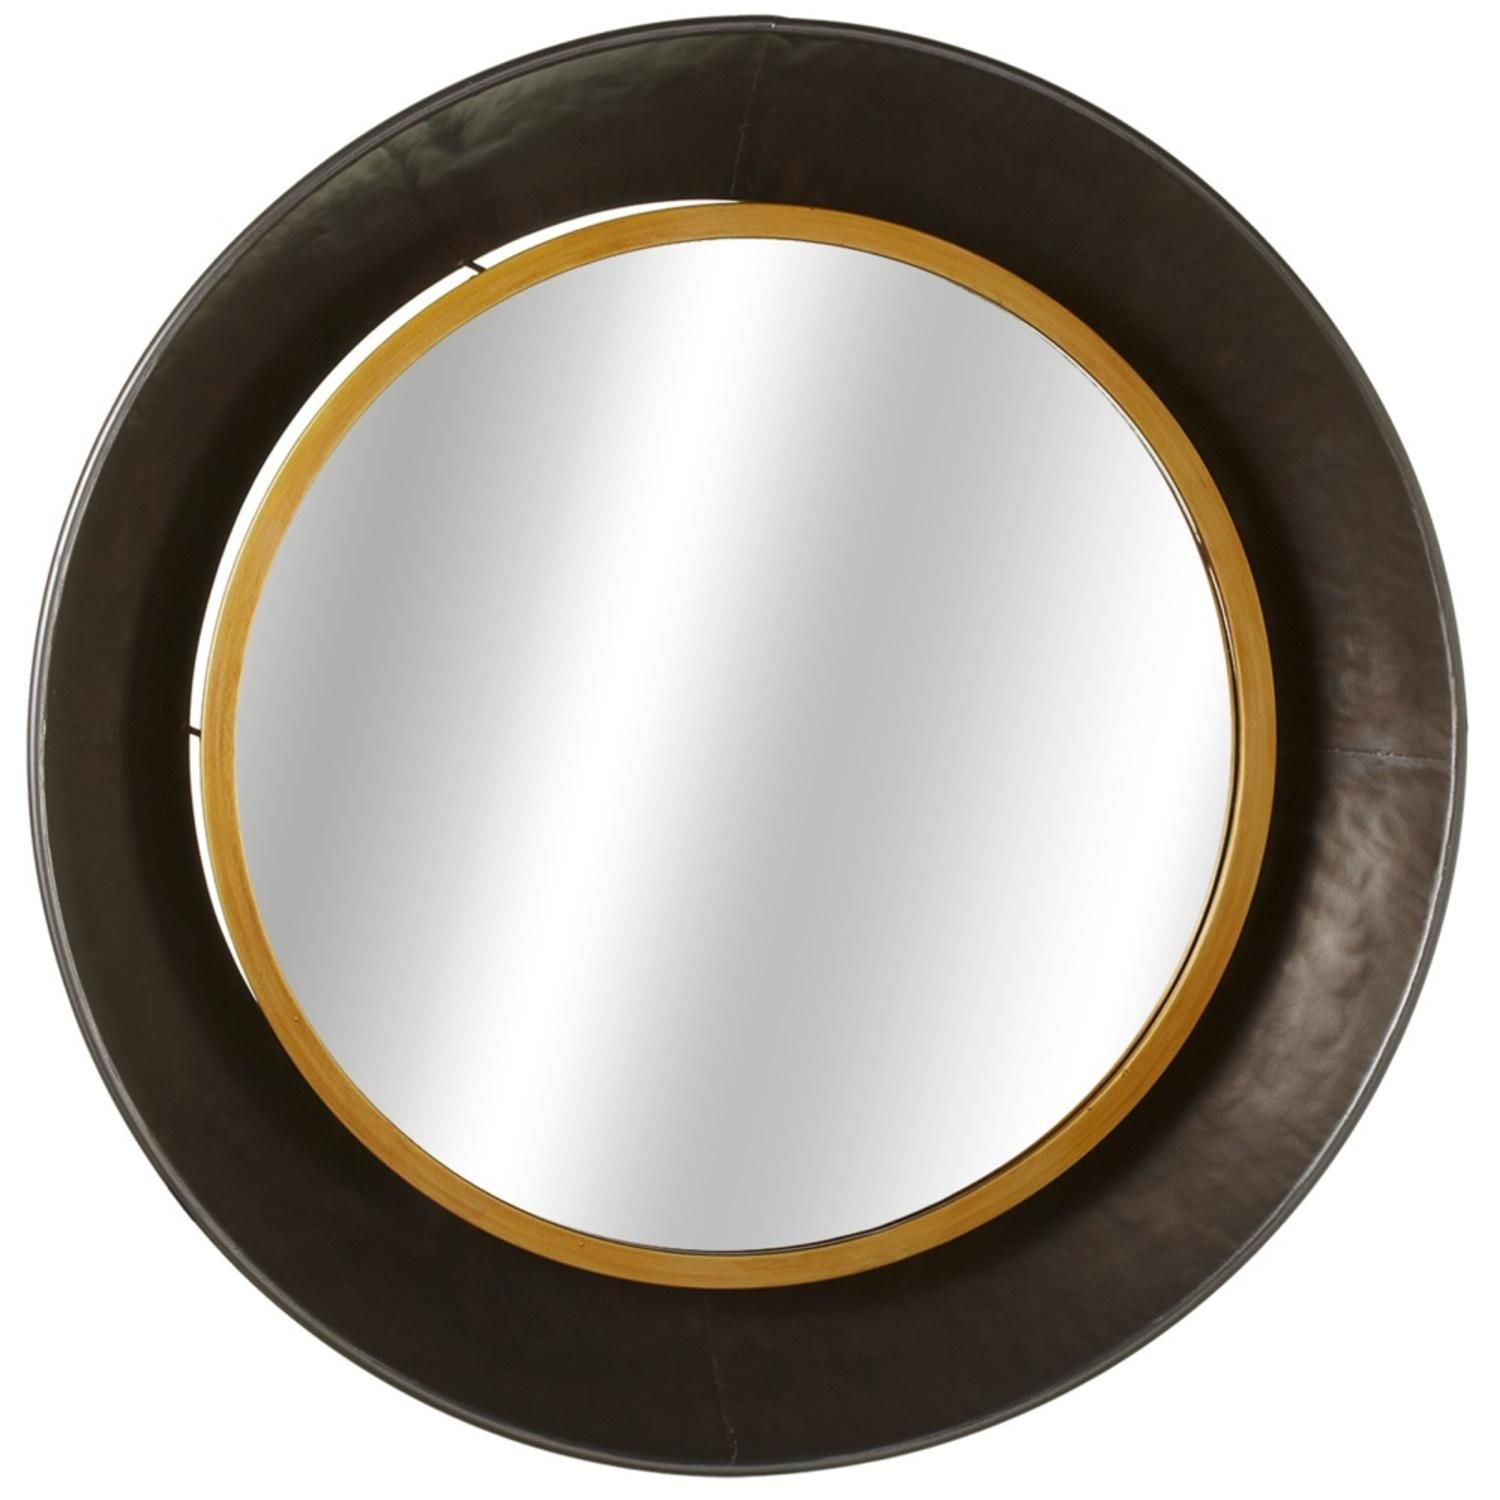 Set Of 2 Brown Decorative Gunmetal Bowl Round Wall Mirror With Gold In Brown Leather Round Wall Mirrors (View 4 of 15)